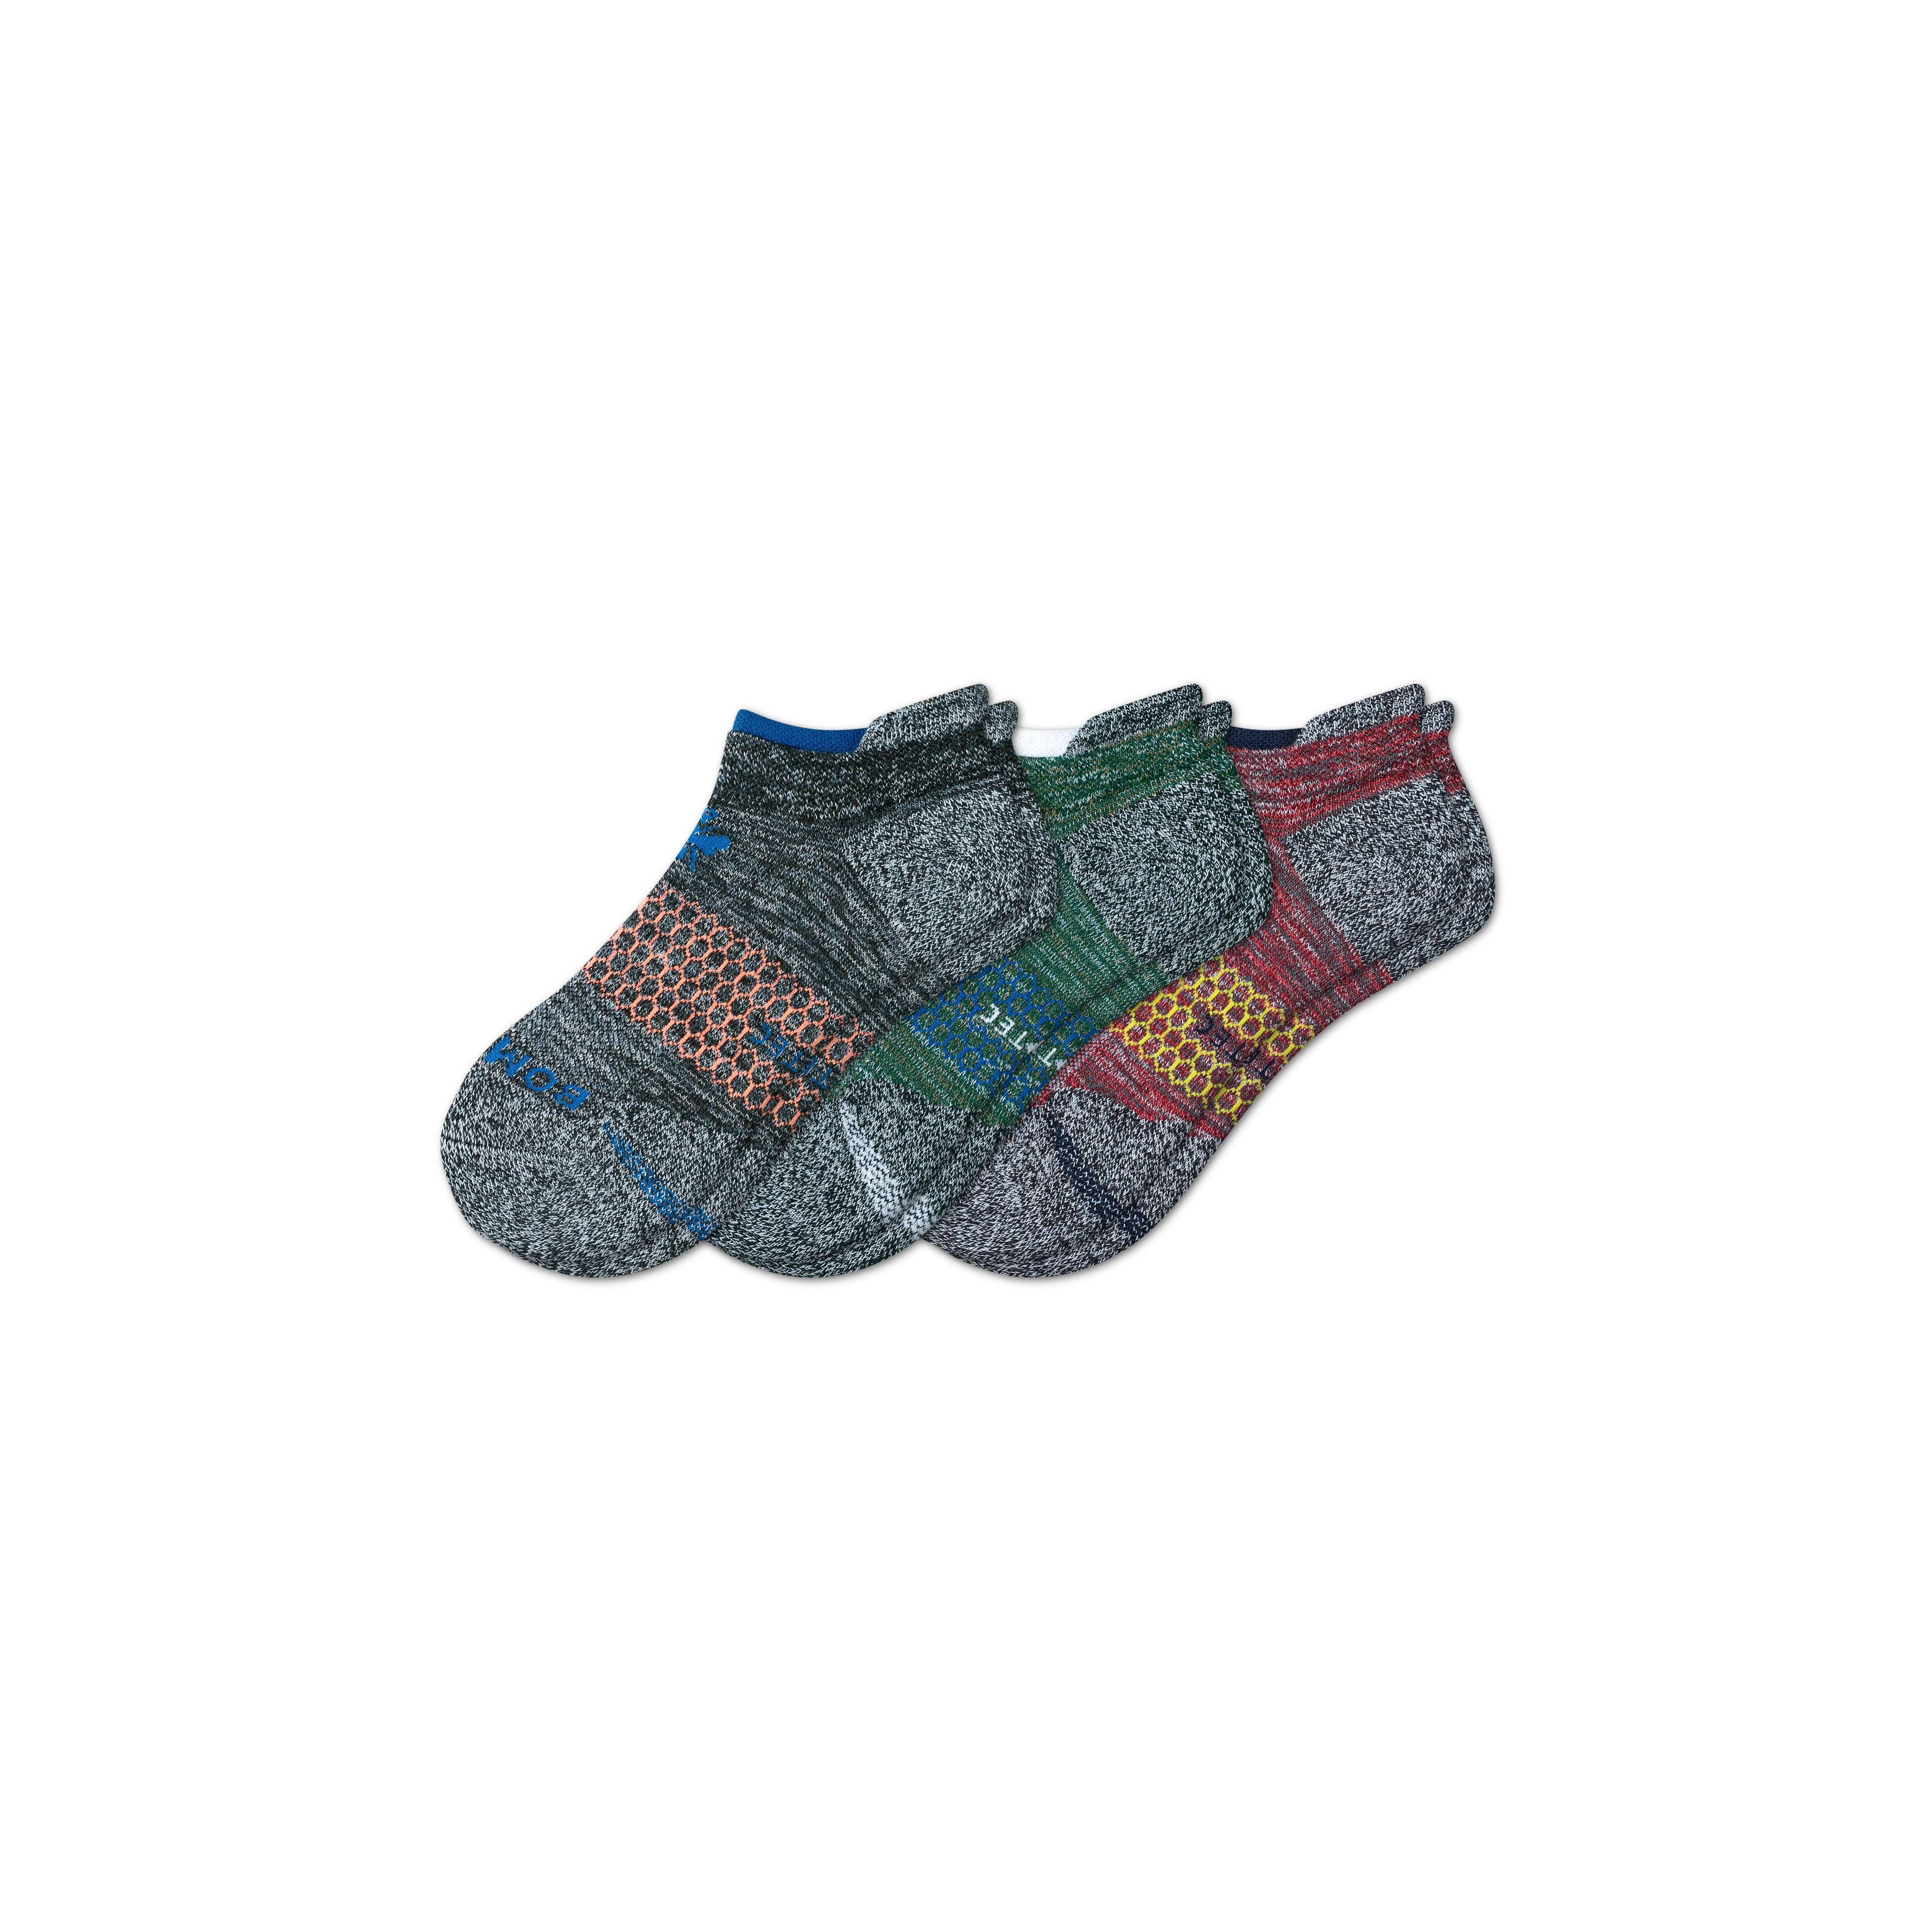 Bombas All-purpose Performance Ankle Sock 3-pack In Blue Pine Mix